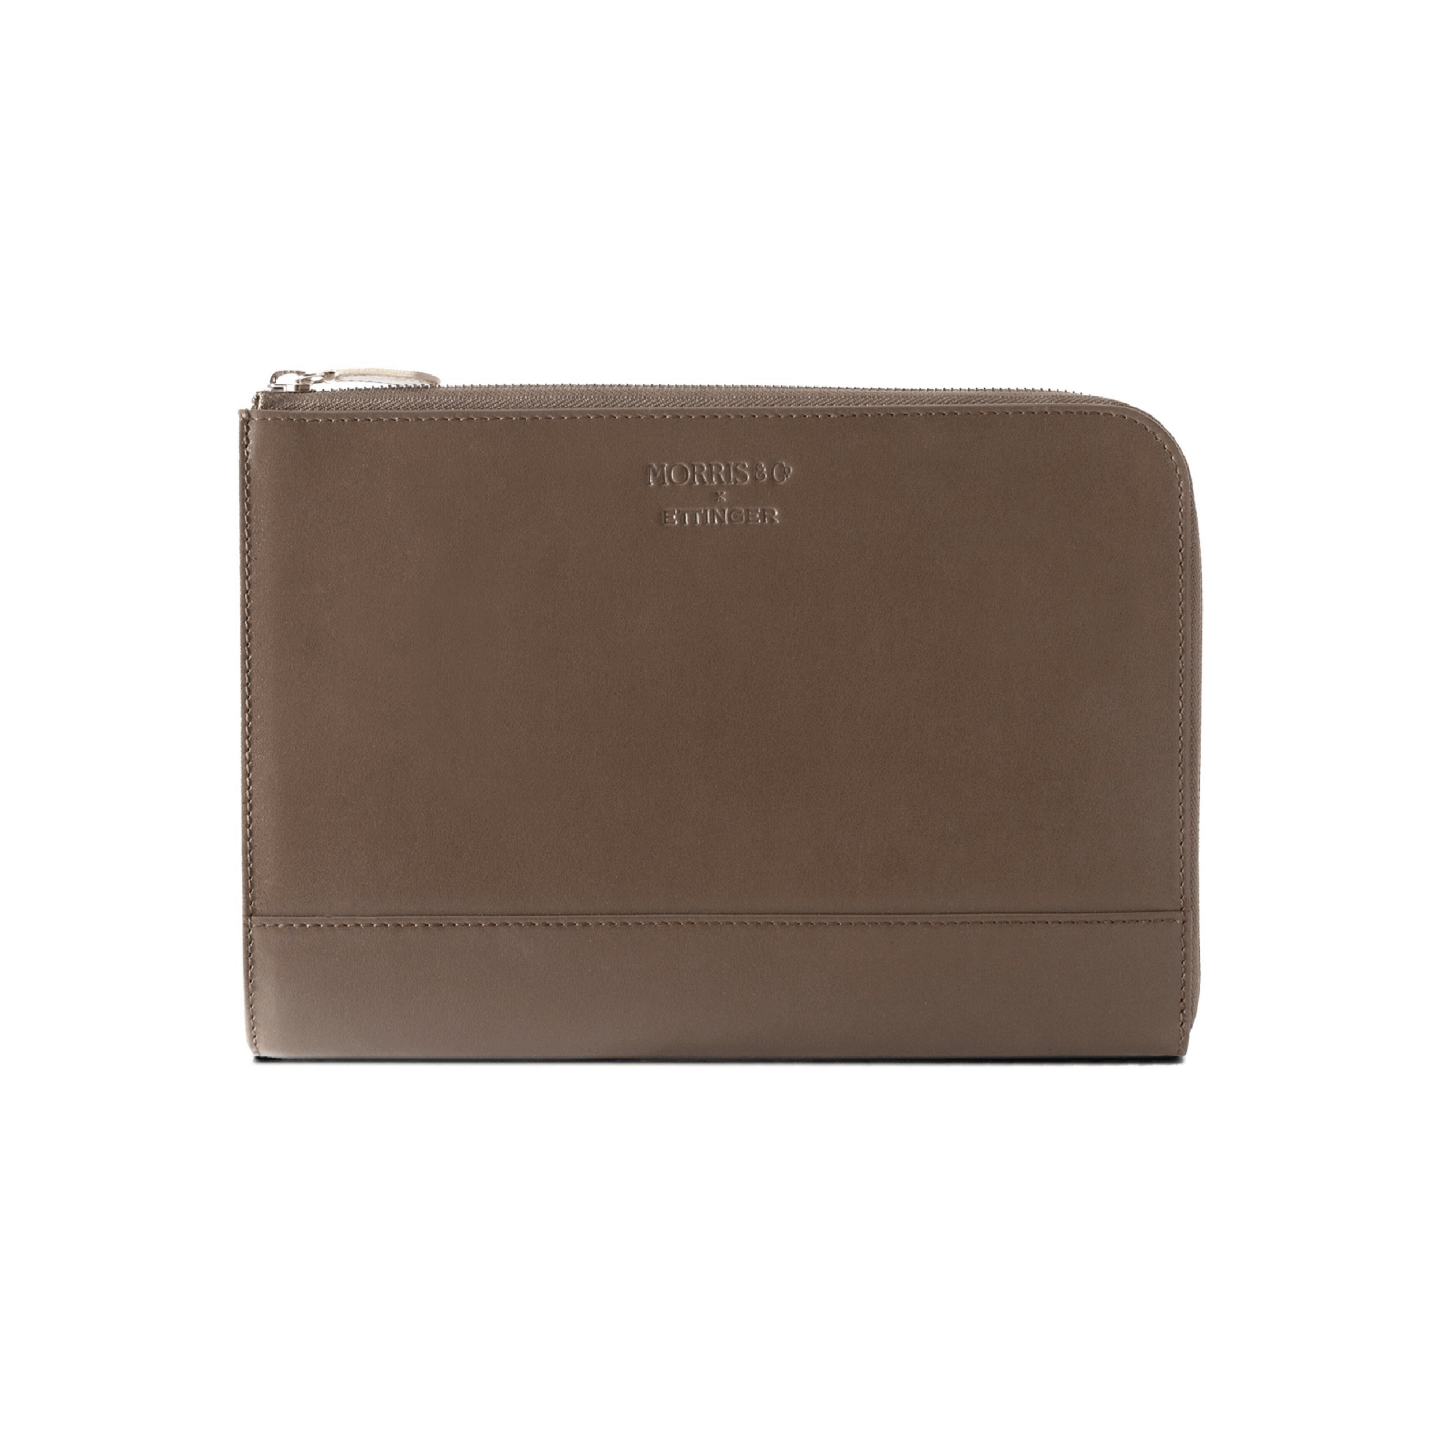 MORRIS & CO. Leather Blackthorn Pouch